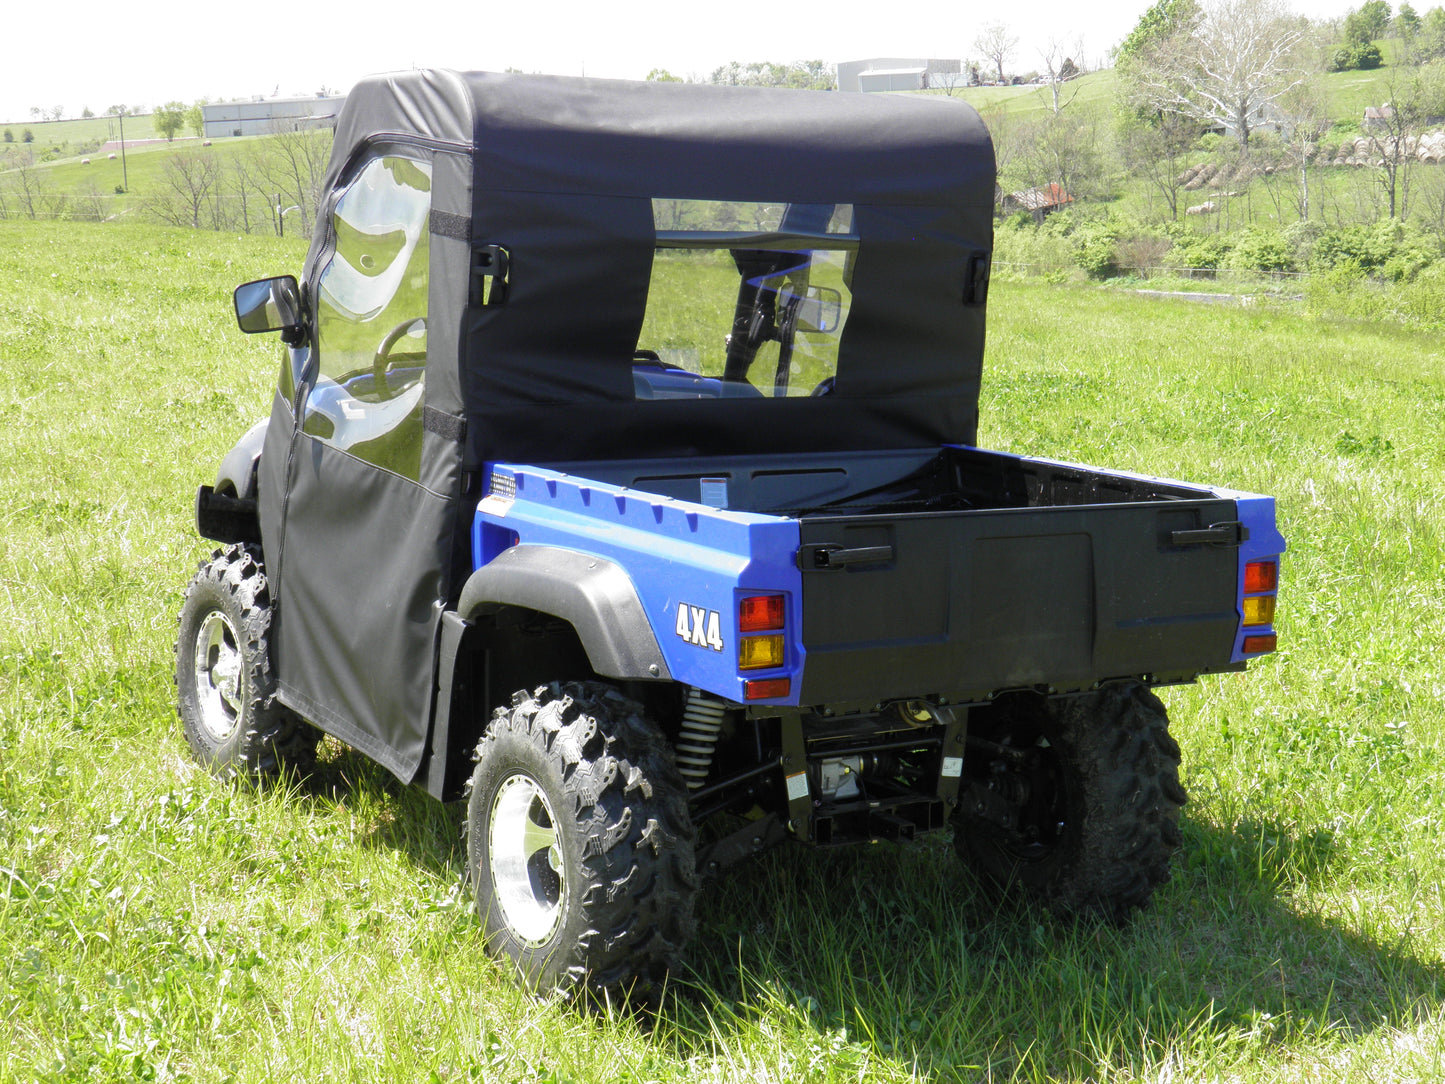 Massimo 500/700 - Full Cab for Hard Windshield with Color, Door Length and Zip Window Options - 3 Star UTV